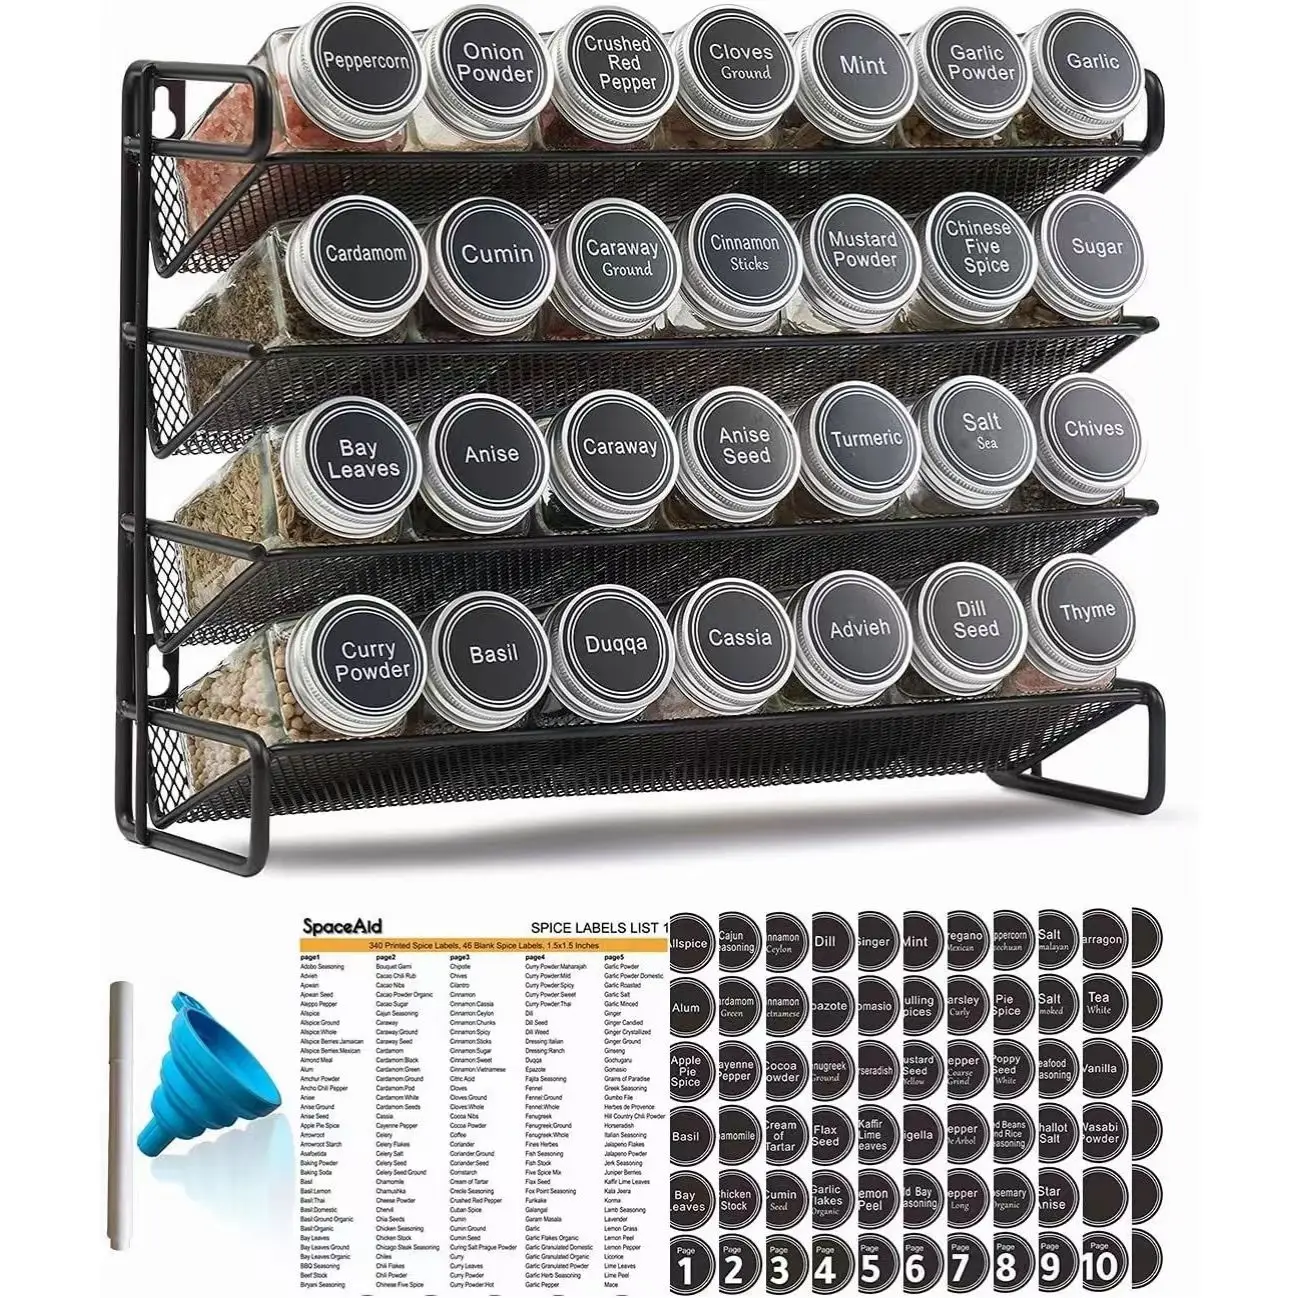 

Spice Jars Countertop Wall Mount Seasoning Organizer for Cabinet 4 Tier Spice Rack with 28 Jars